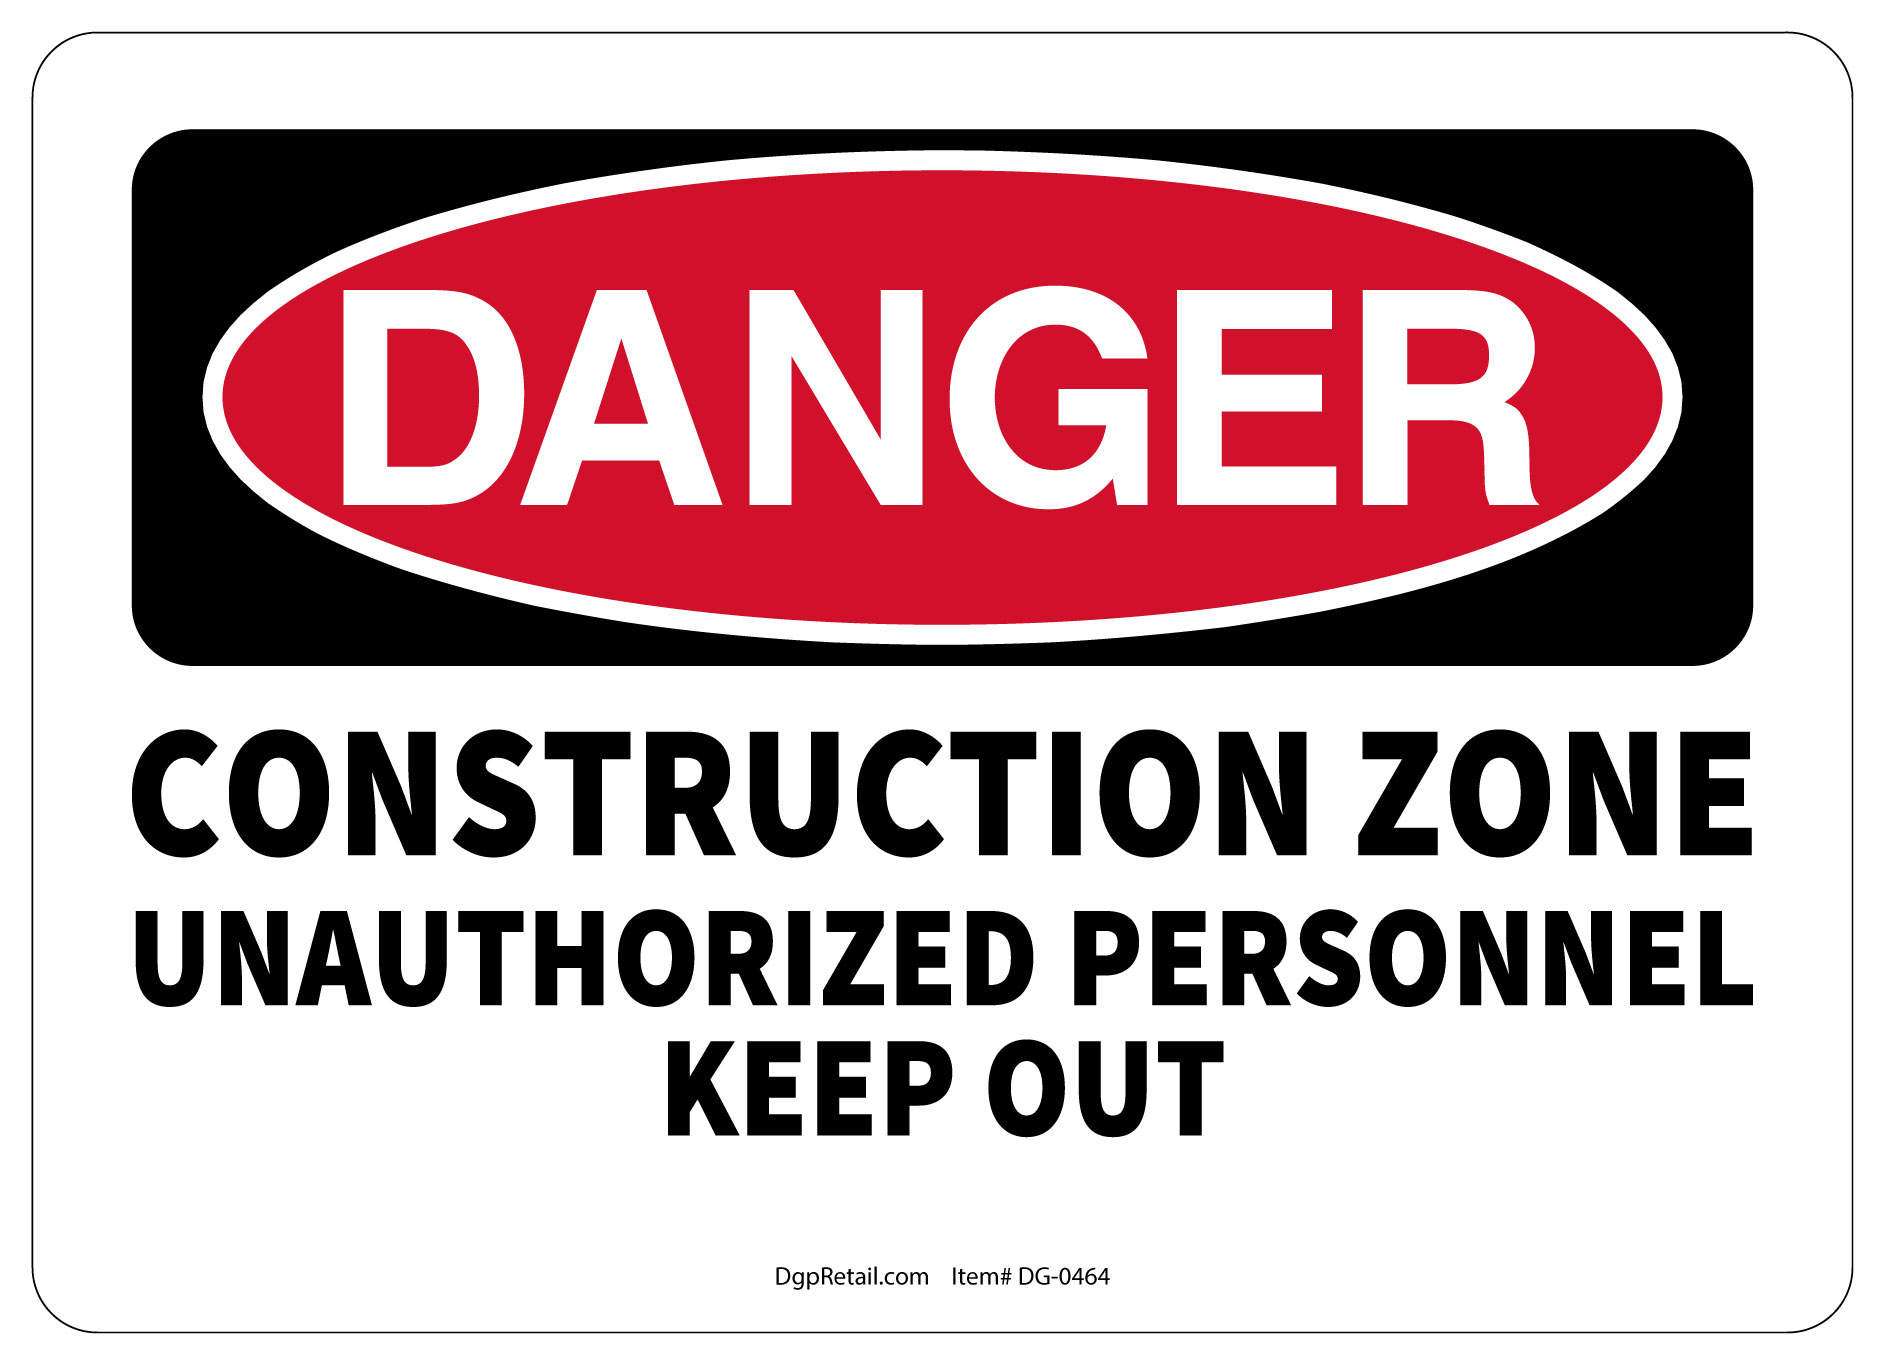 OSHA DANGER SAFETY SIGN CONSTRUCTION ZONE UNAUTHORIZED PERSONNEL KEEP ...